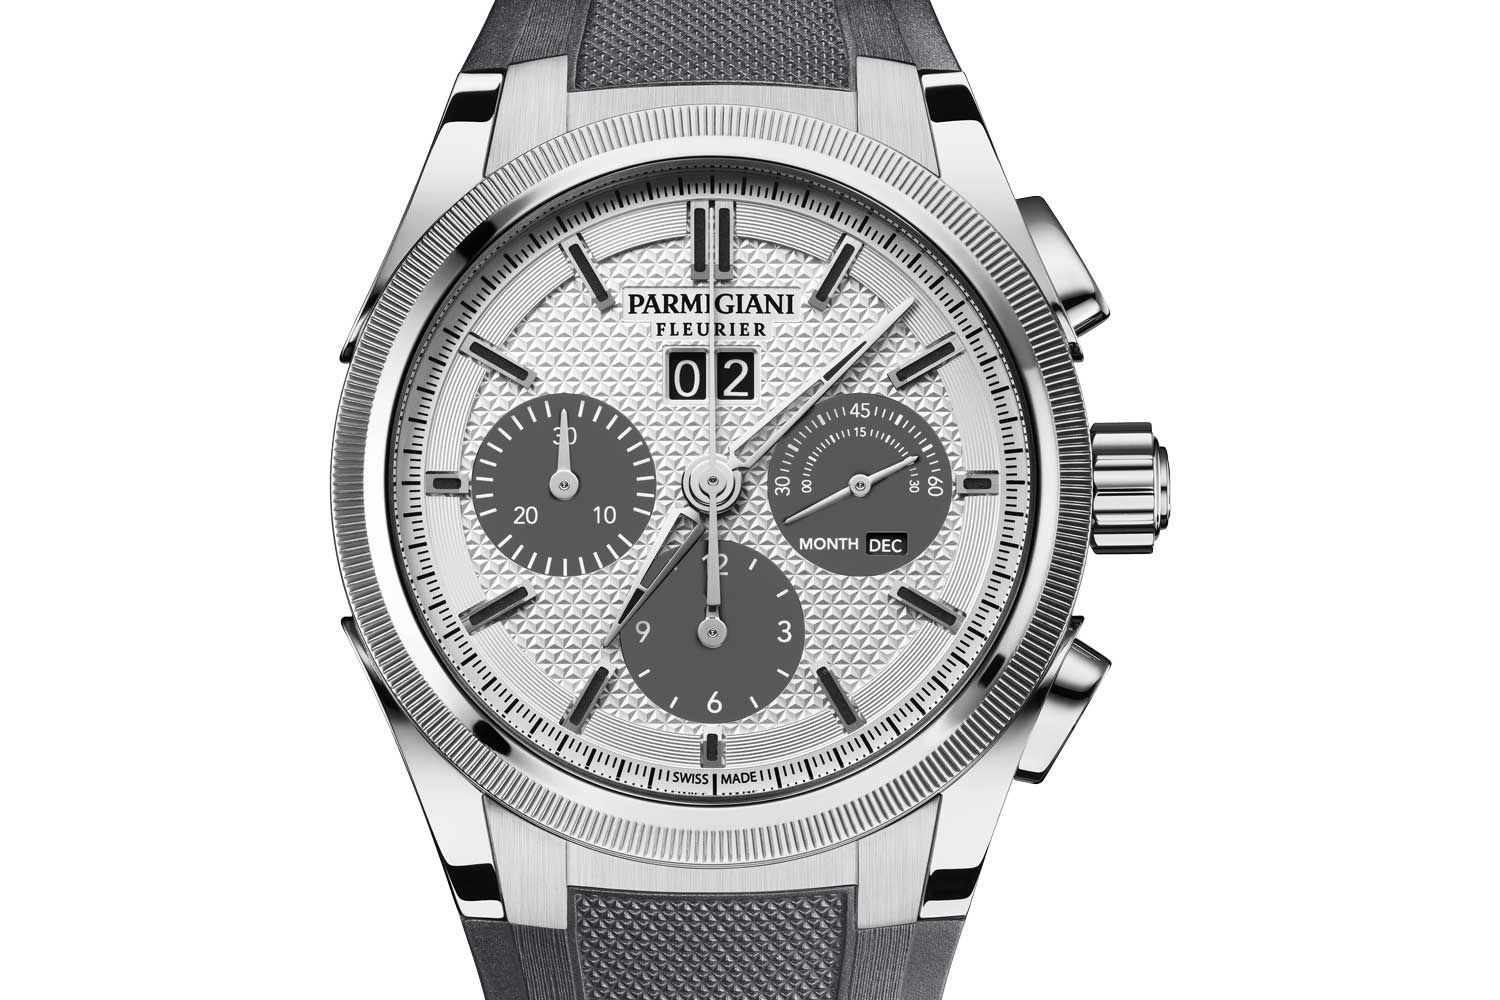 Steel version of the Tonda GT Chronograph with annual calendar